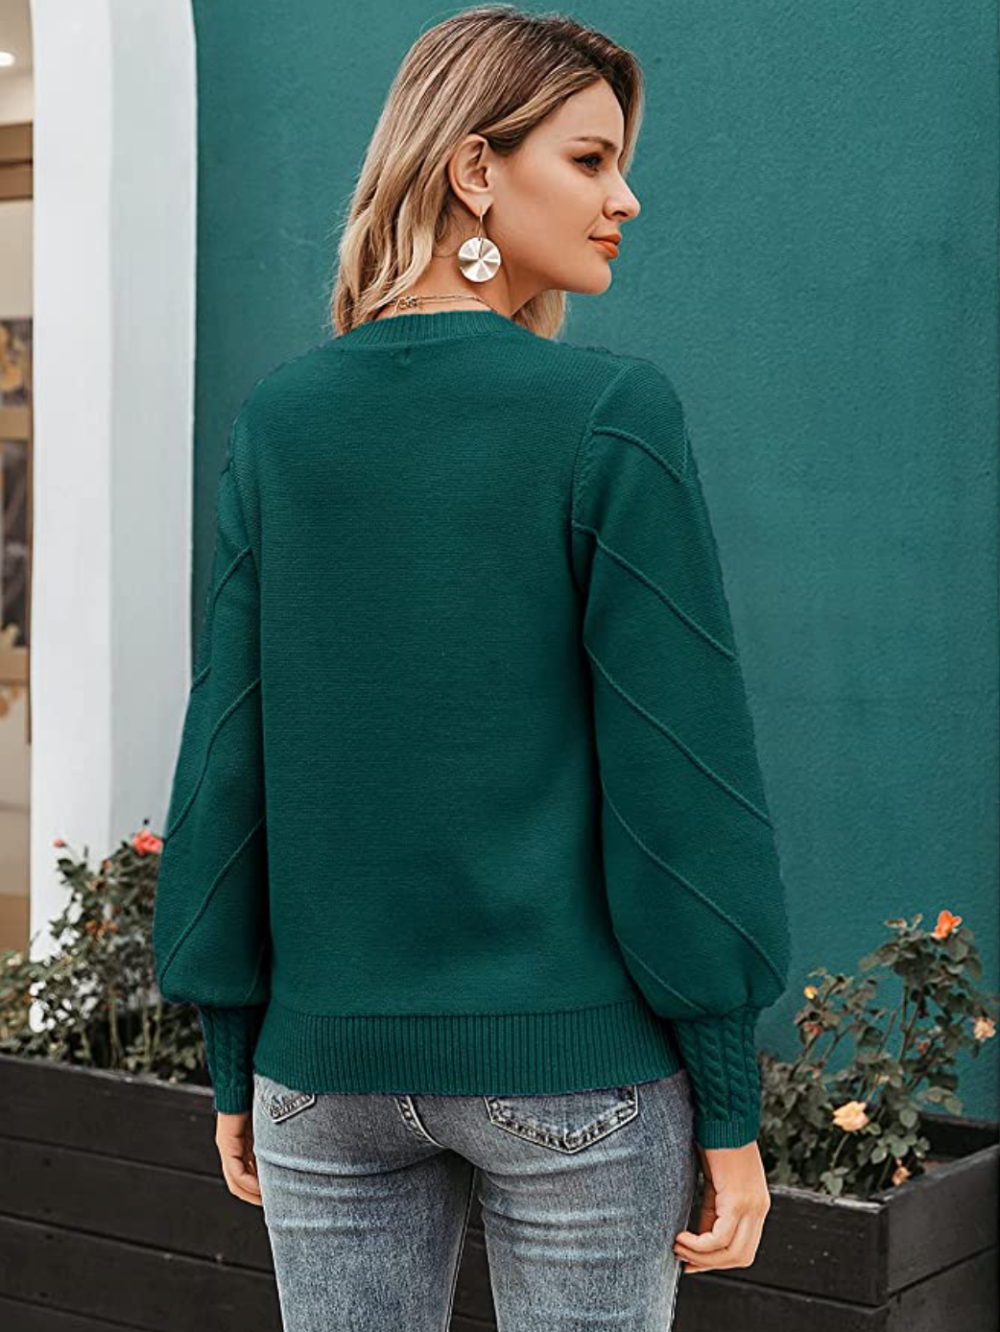 Miessial Sweater Has Details That Give It Such a Whimsical Vibe | Us Weekly